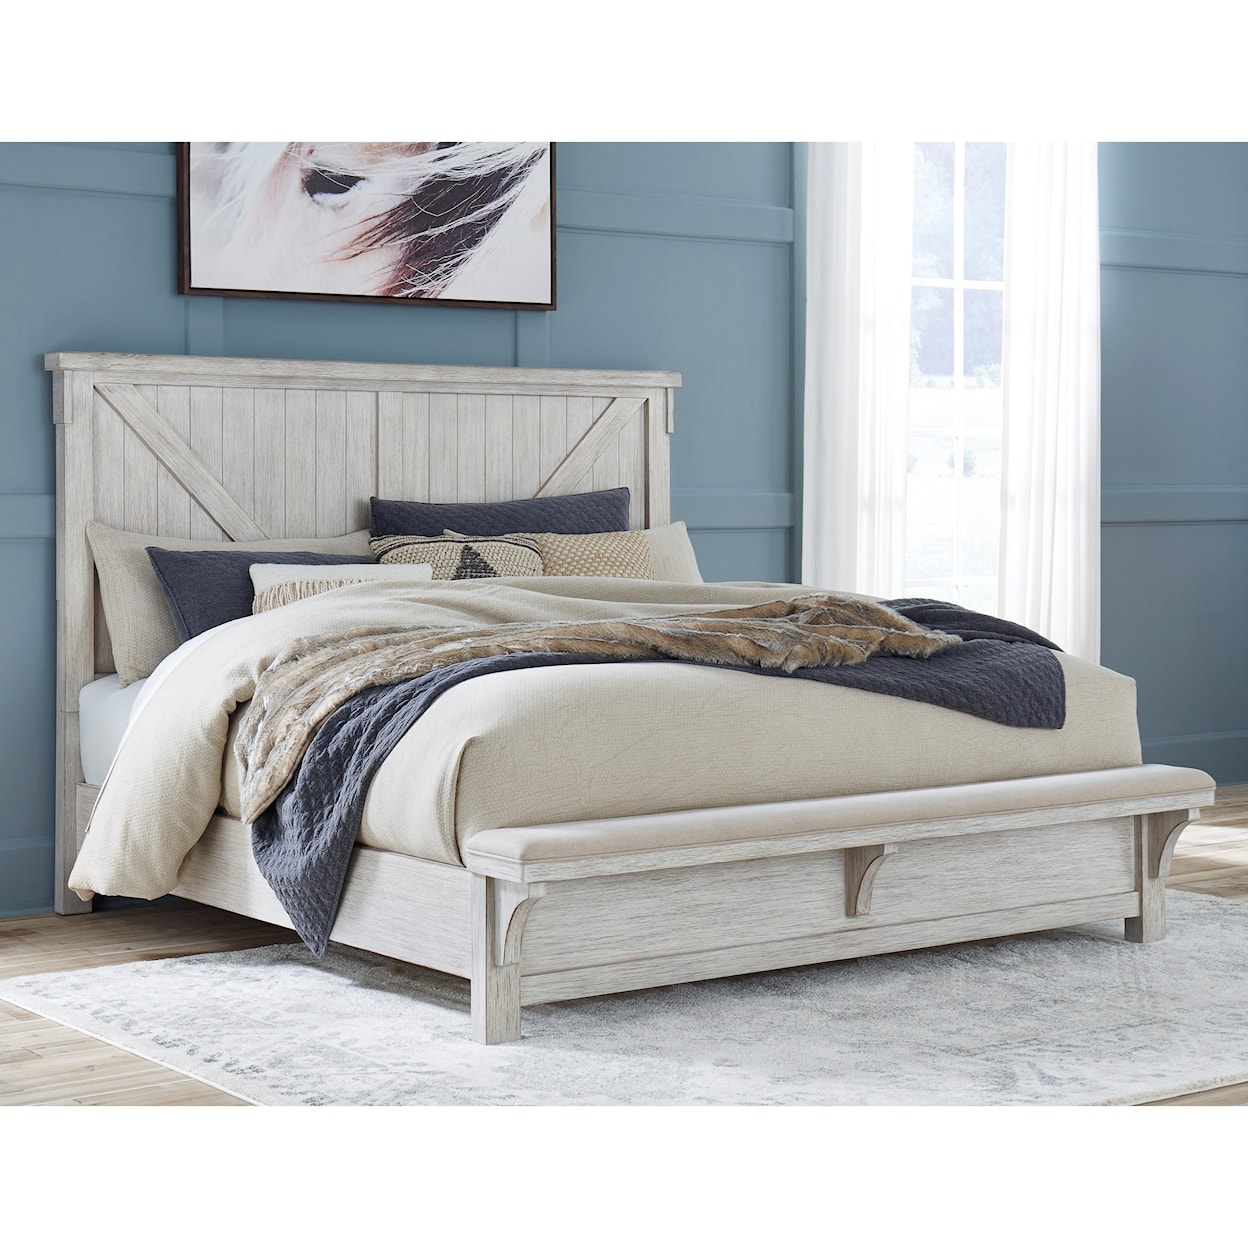 Ashley Signature Design Brashland Queen Bed with Footboard Bench